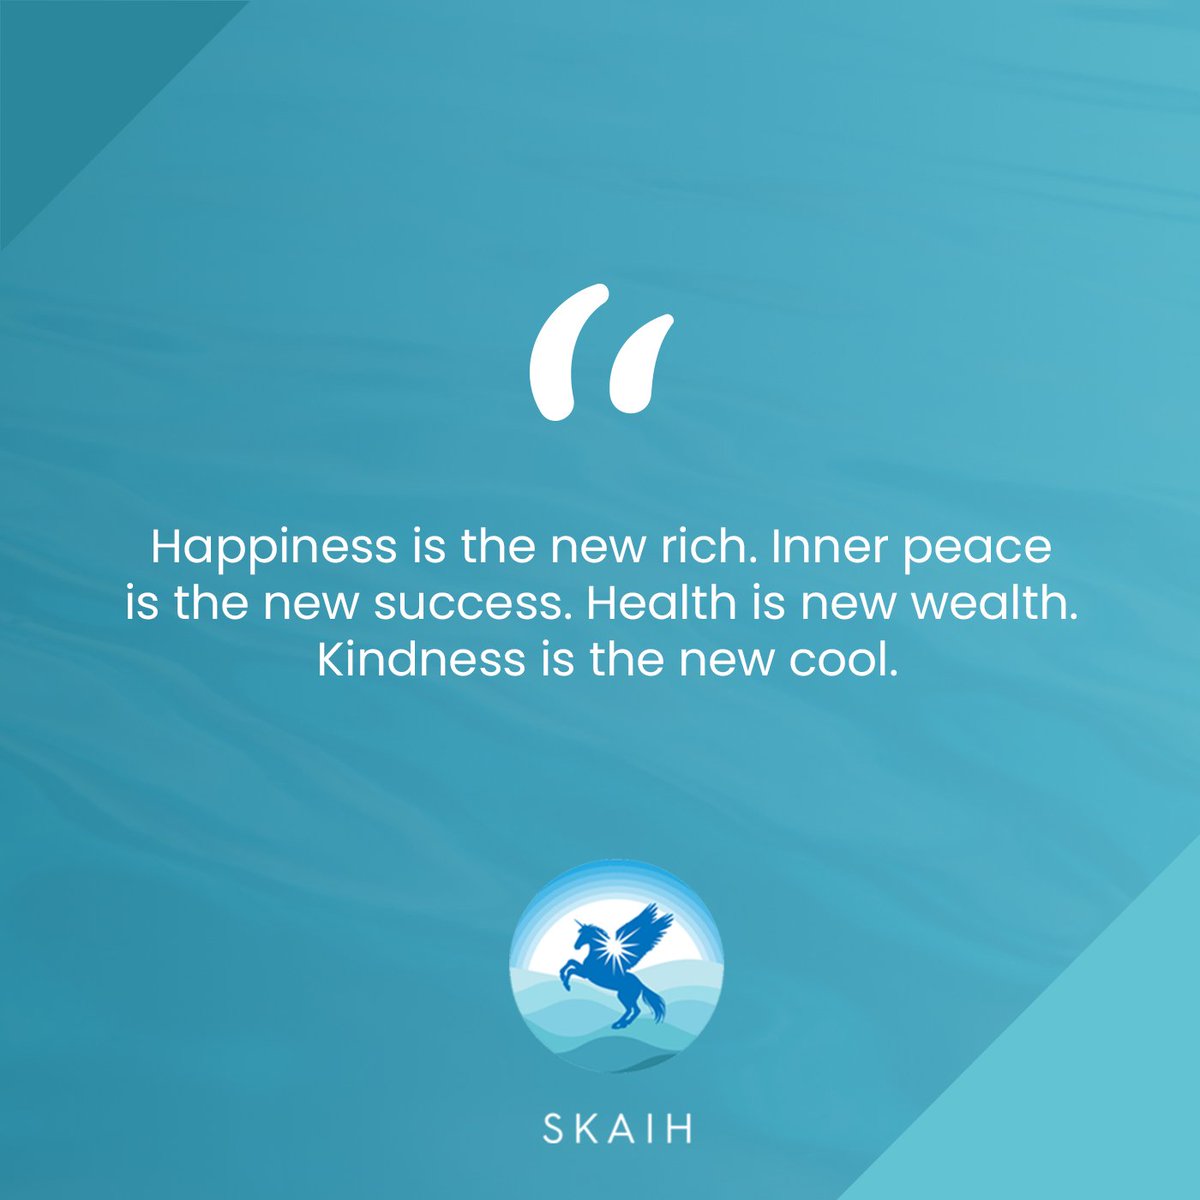 Happiness is the new rich. Inner peace is the new success. Health is new wealth. Kindness is the new cool.    #wellnessquotes 
#wellnessquotesdaily
#wellnessjourney